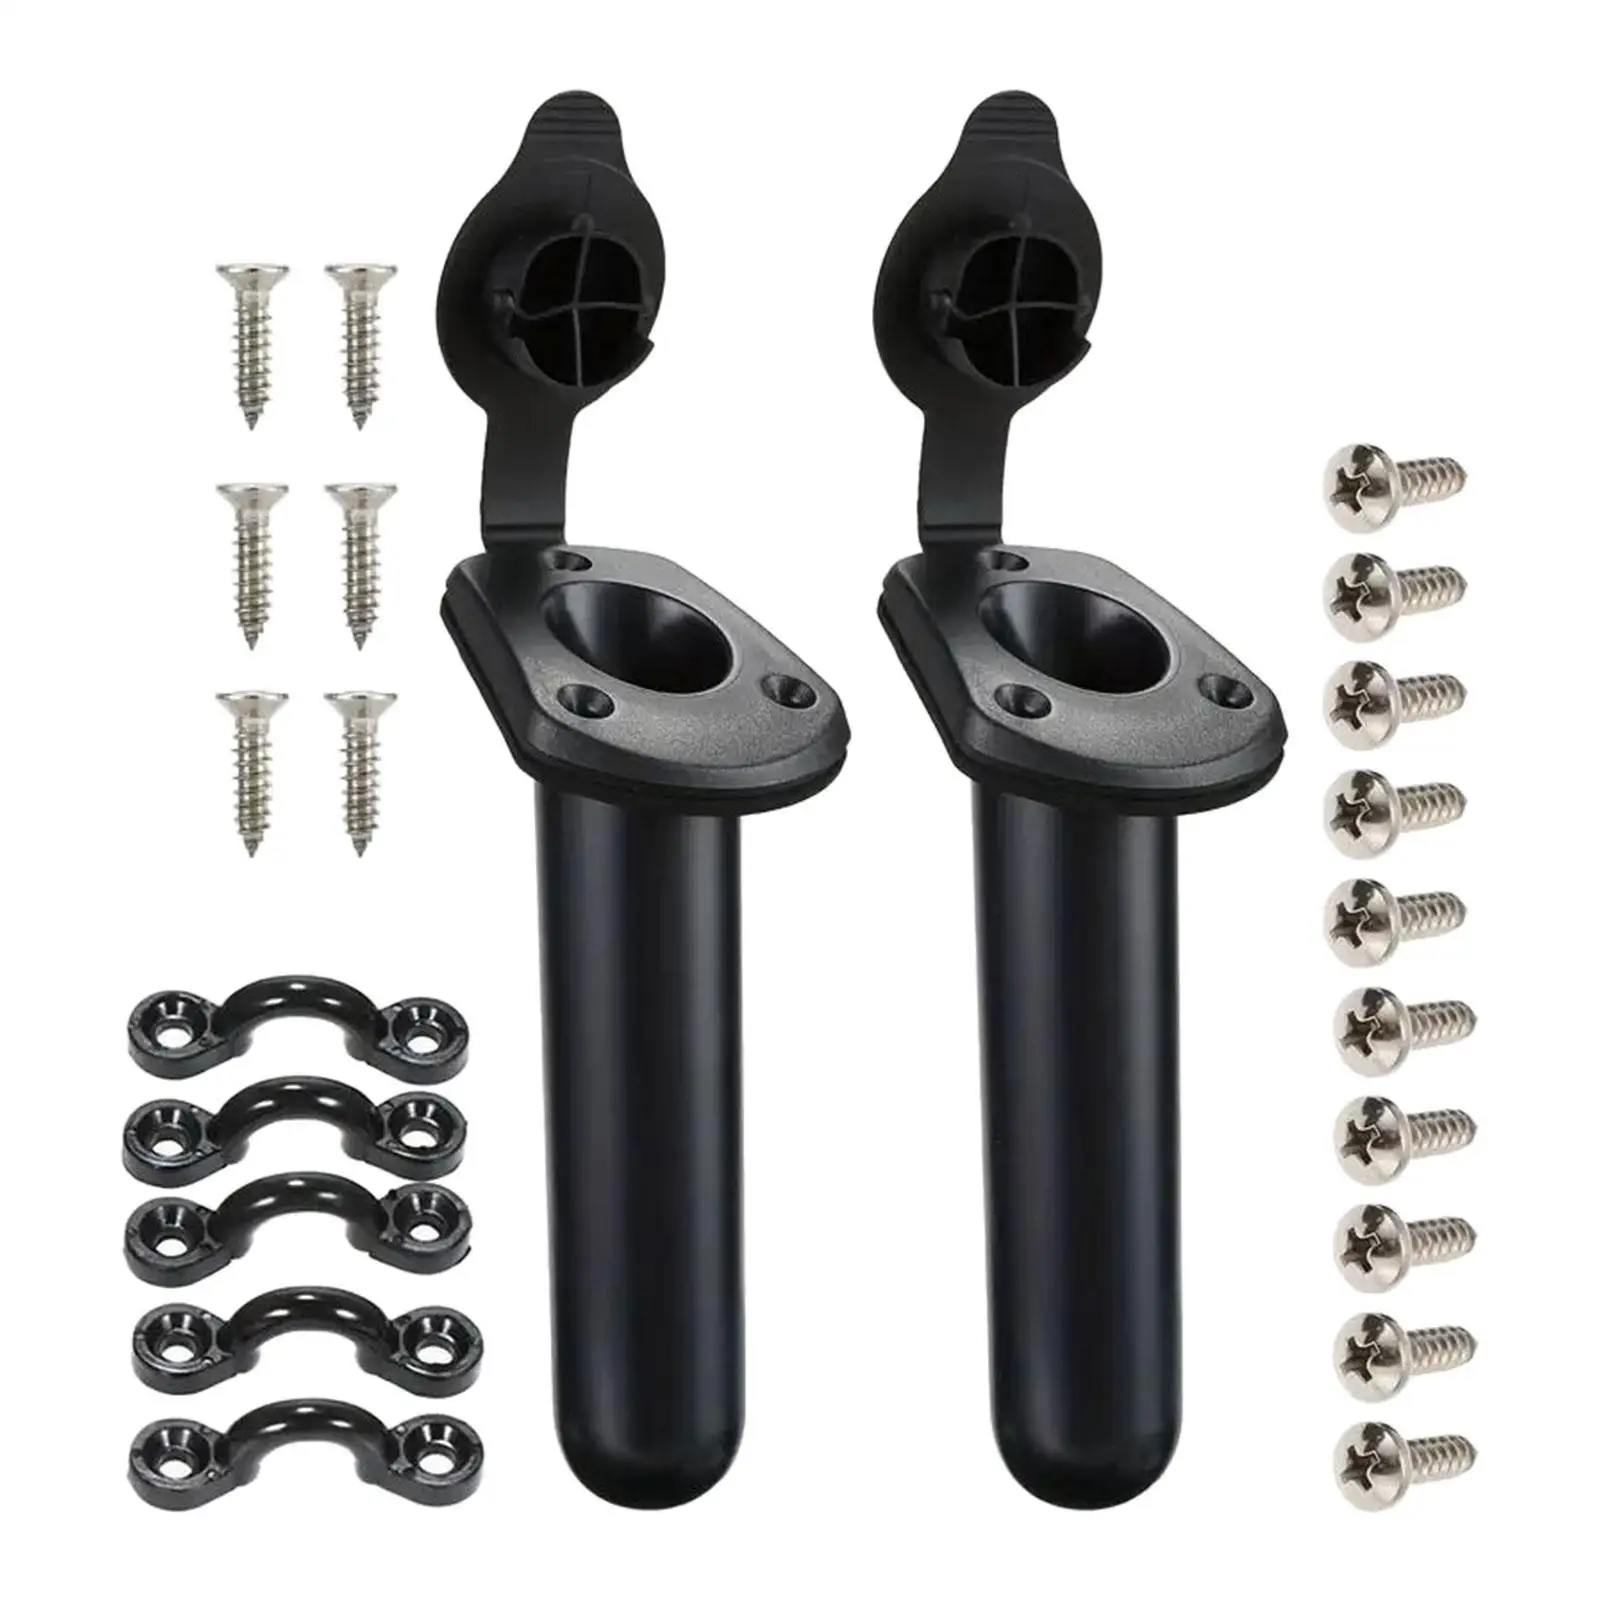 

Kayak Fishing Rod Holder Fishing Boat Rod Holders and Cap Cover, Direct Replaces Fishing Tackle Accessory Tool for Canoe